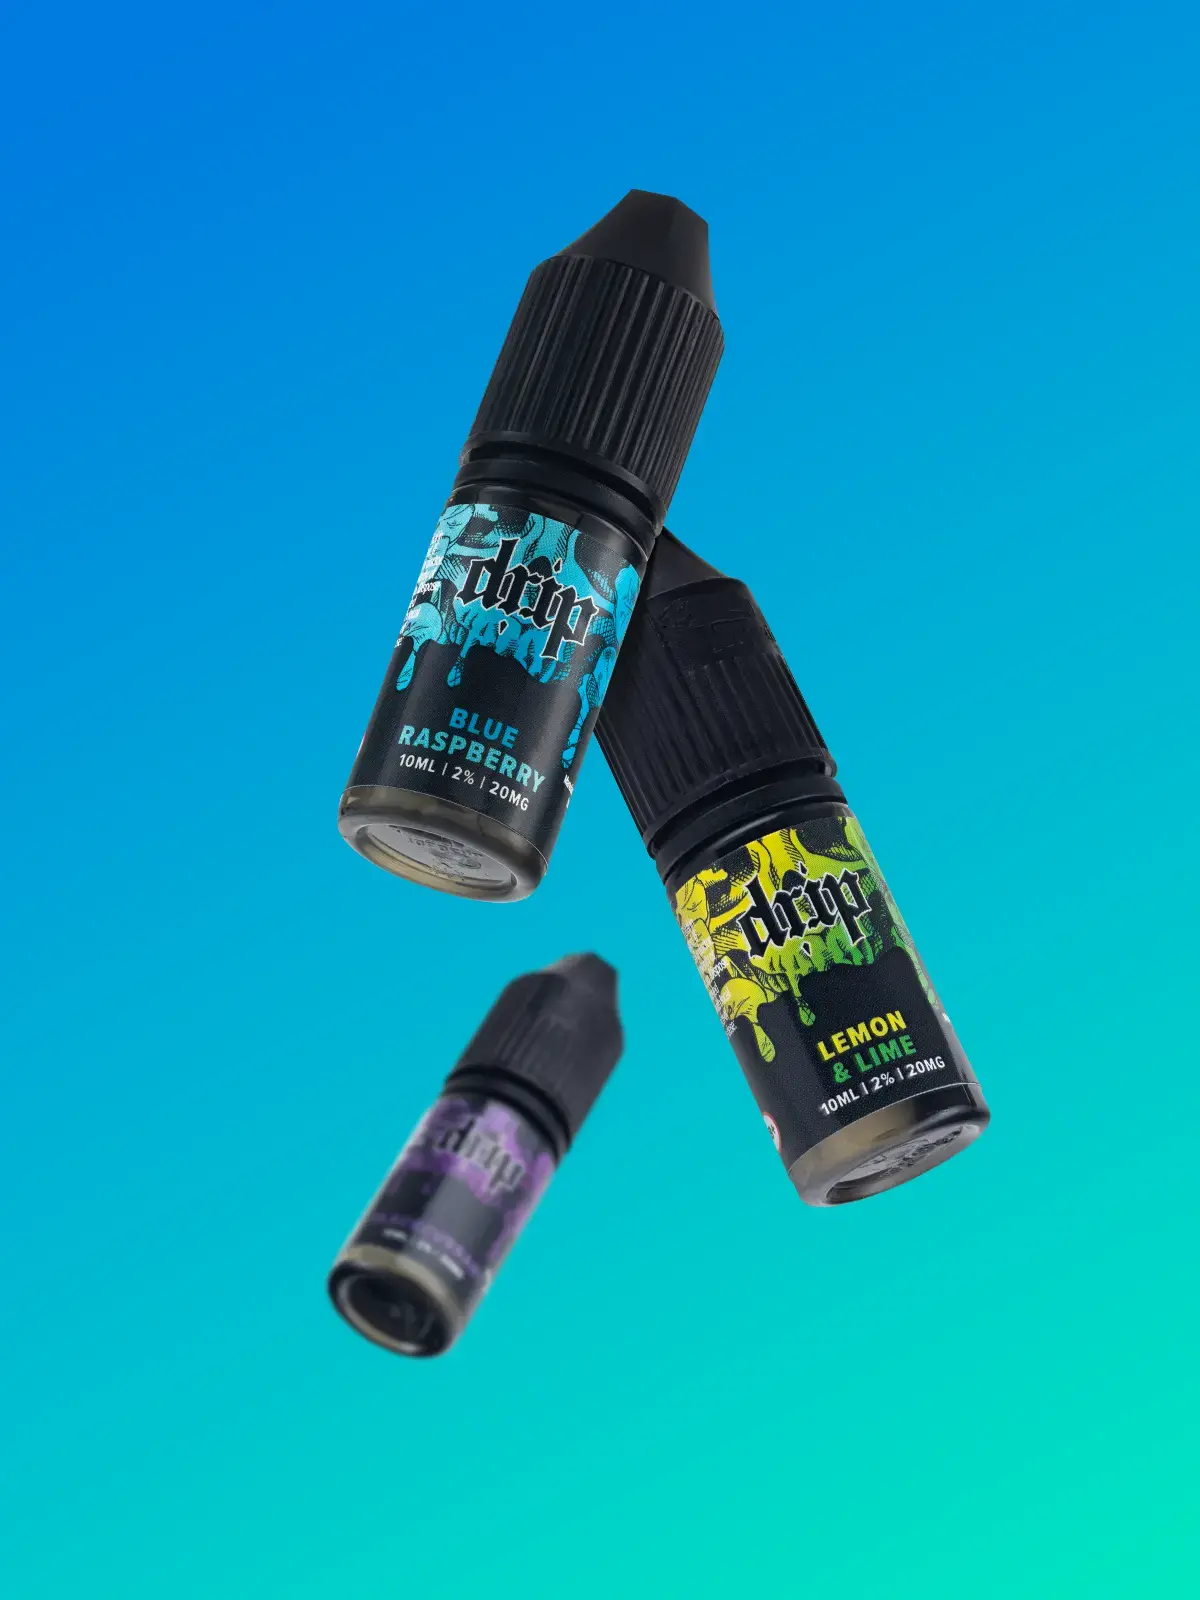 Three bottles of Drip e-liquid; Blue Raspberry, Lemon & Lime and Blackcurrant floating in front of a blue/green background